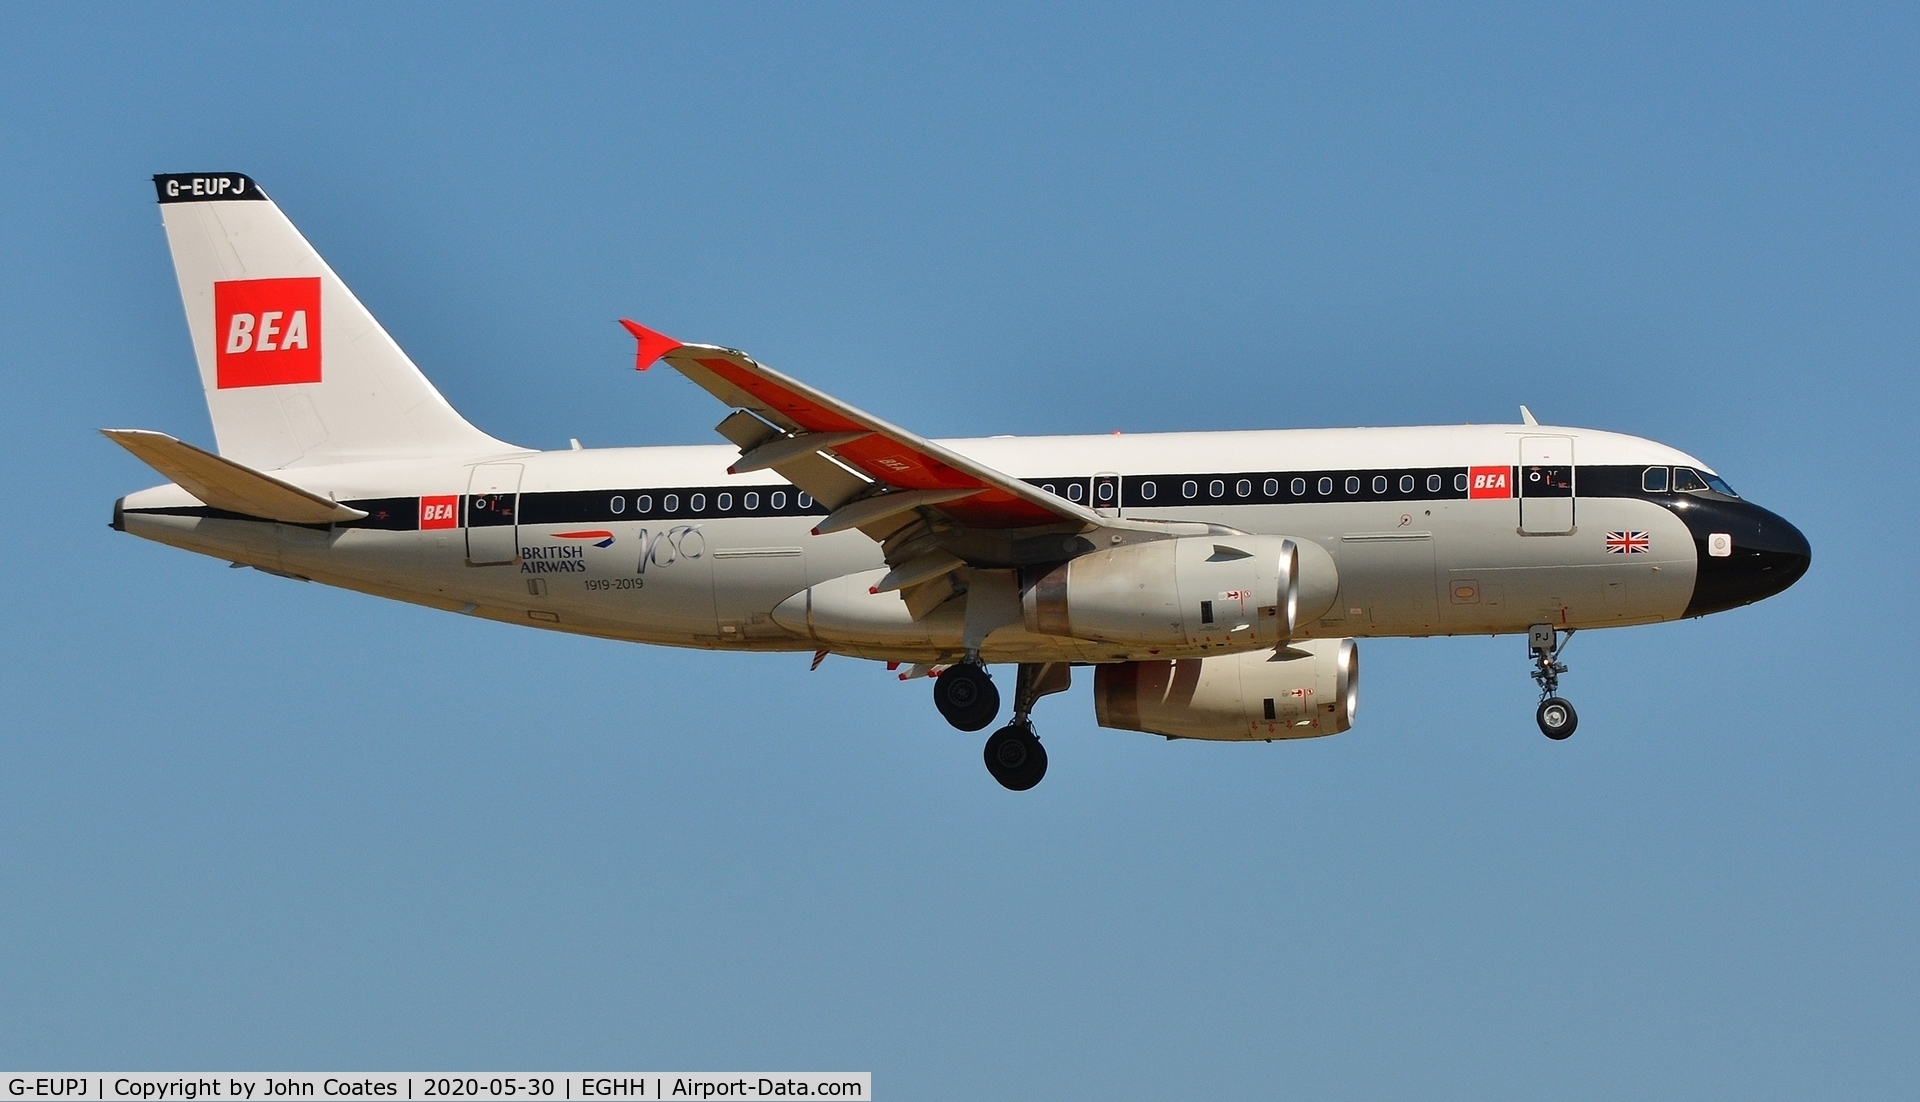 G-EUPJ, 2000 Airbus A319-131 C/N 1232, Finals to 08